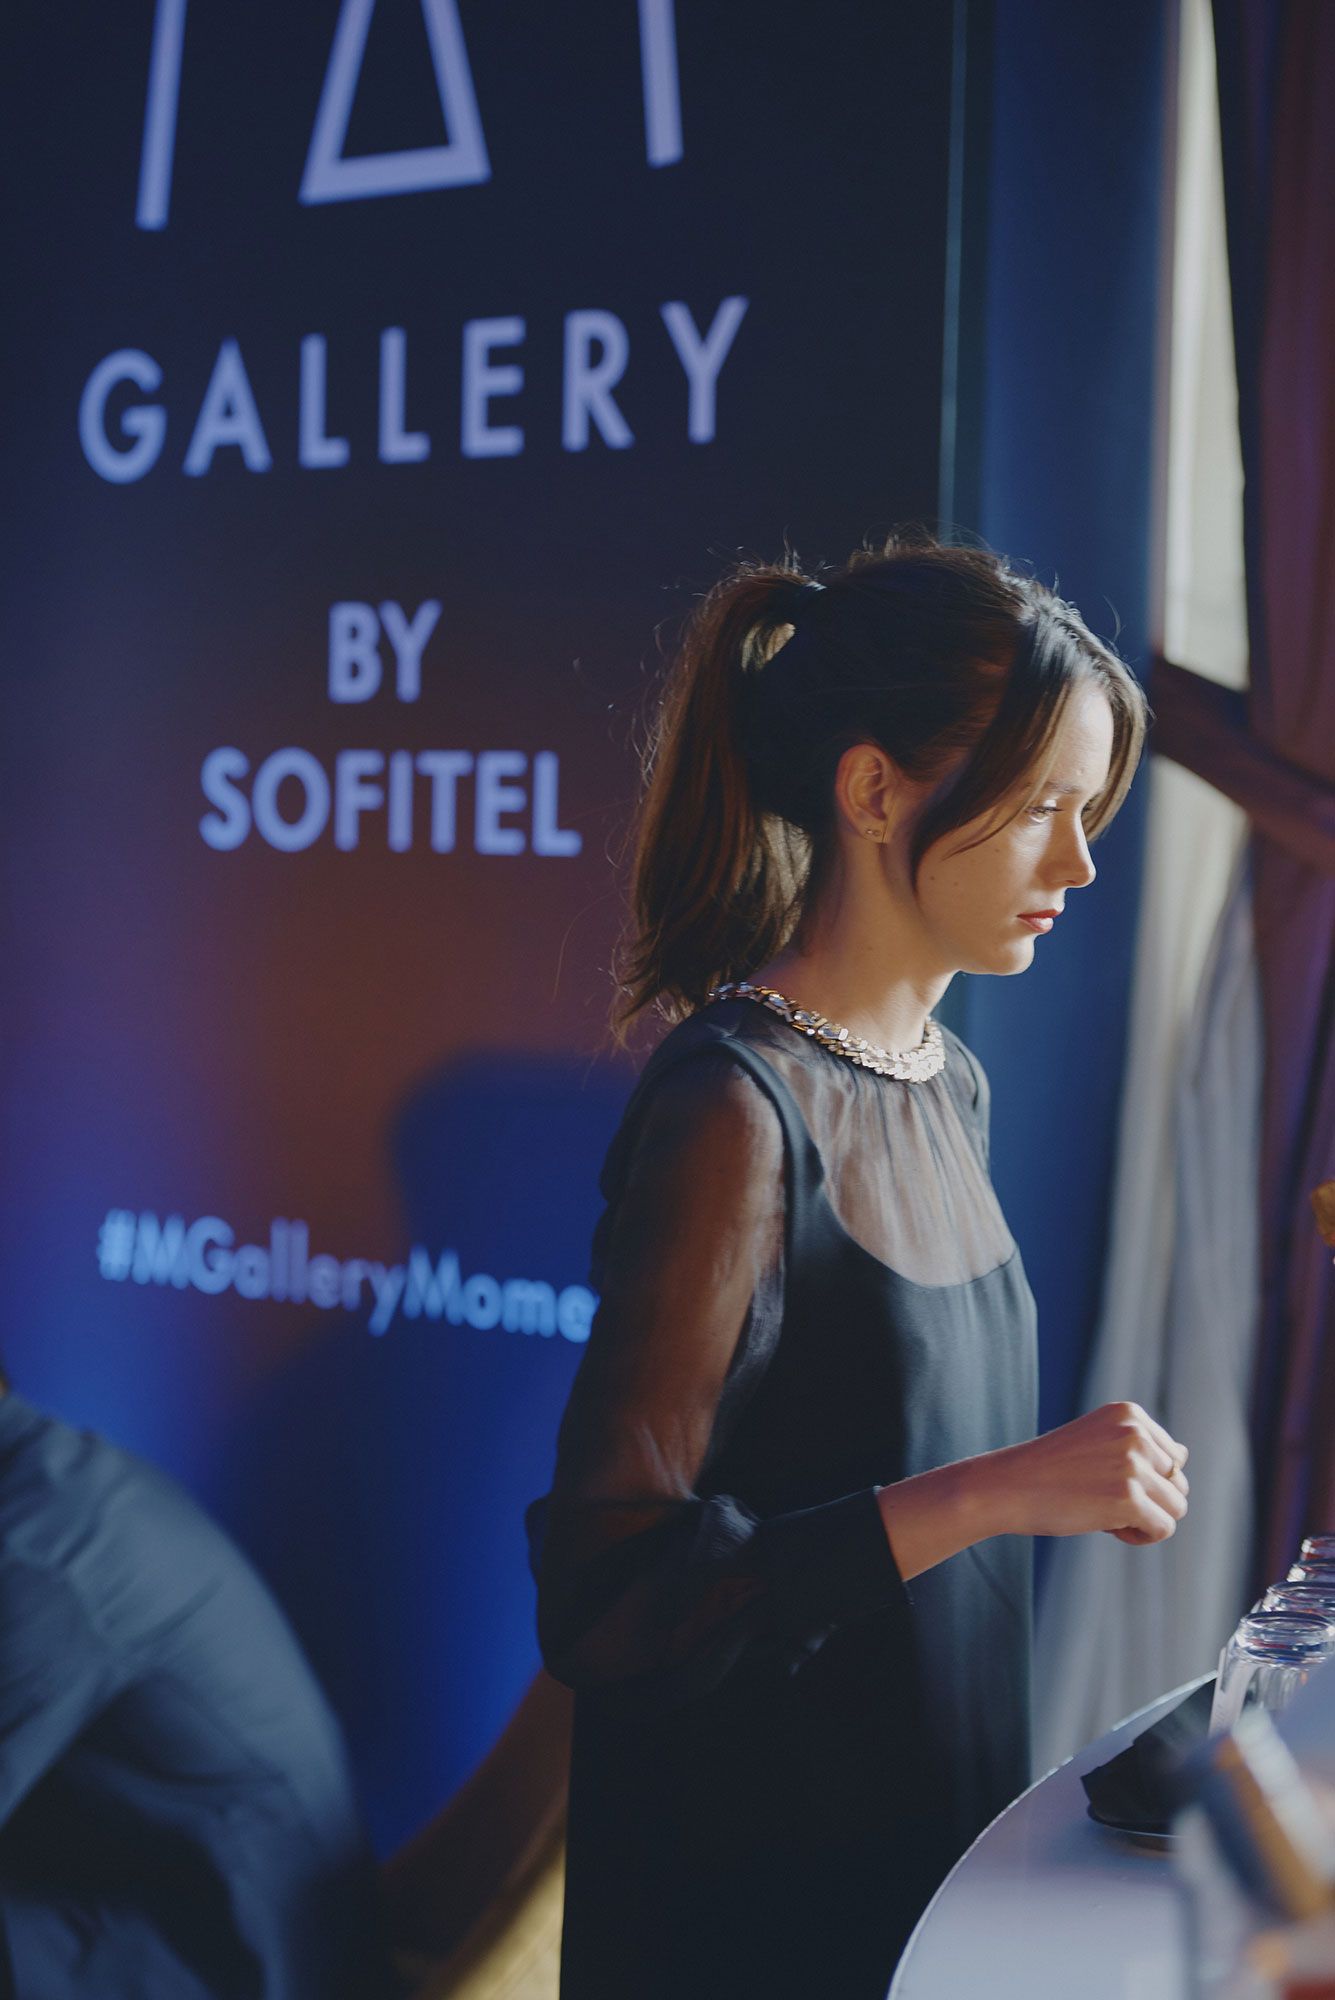 Stacy Martin au salon capsule *Le Grand Hôtel Cabourg - MGallery by Sofitel Sofitel*
*Maquillage Dr Hauschka Coiffure Franck Provost*, *Roger Vivier*